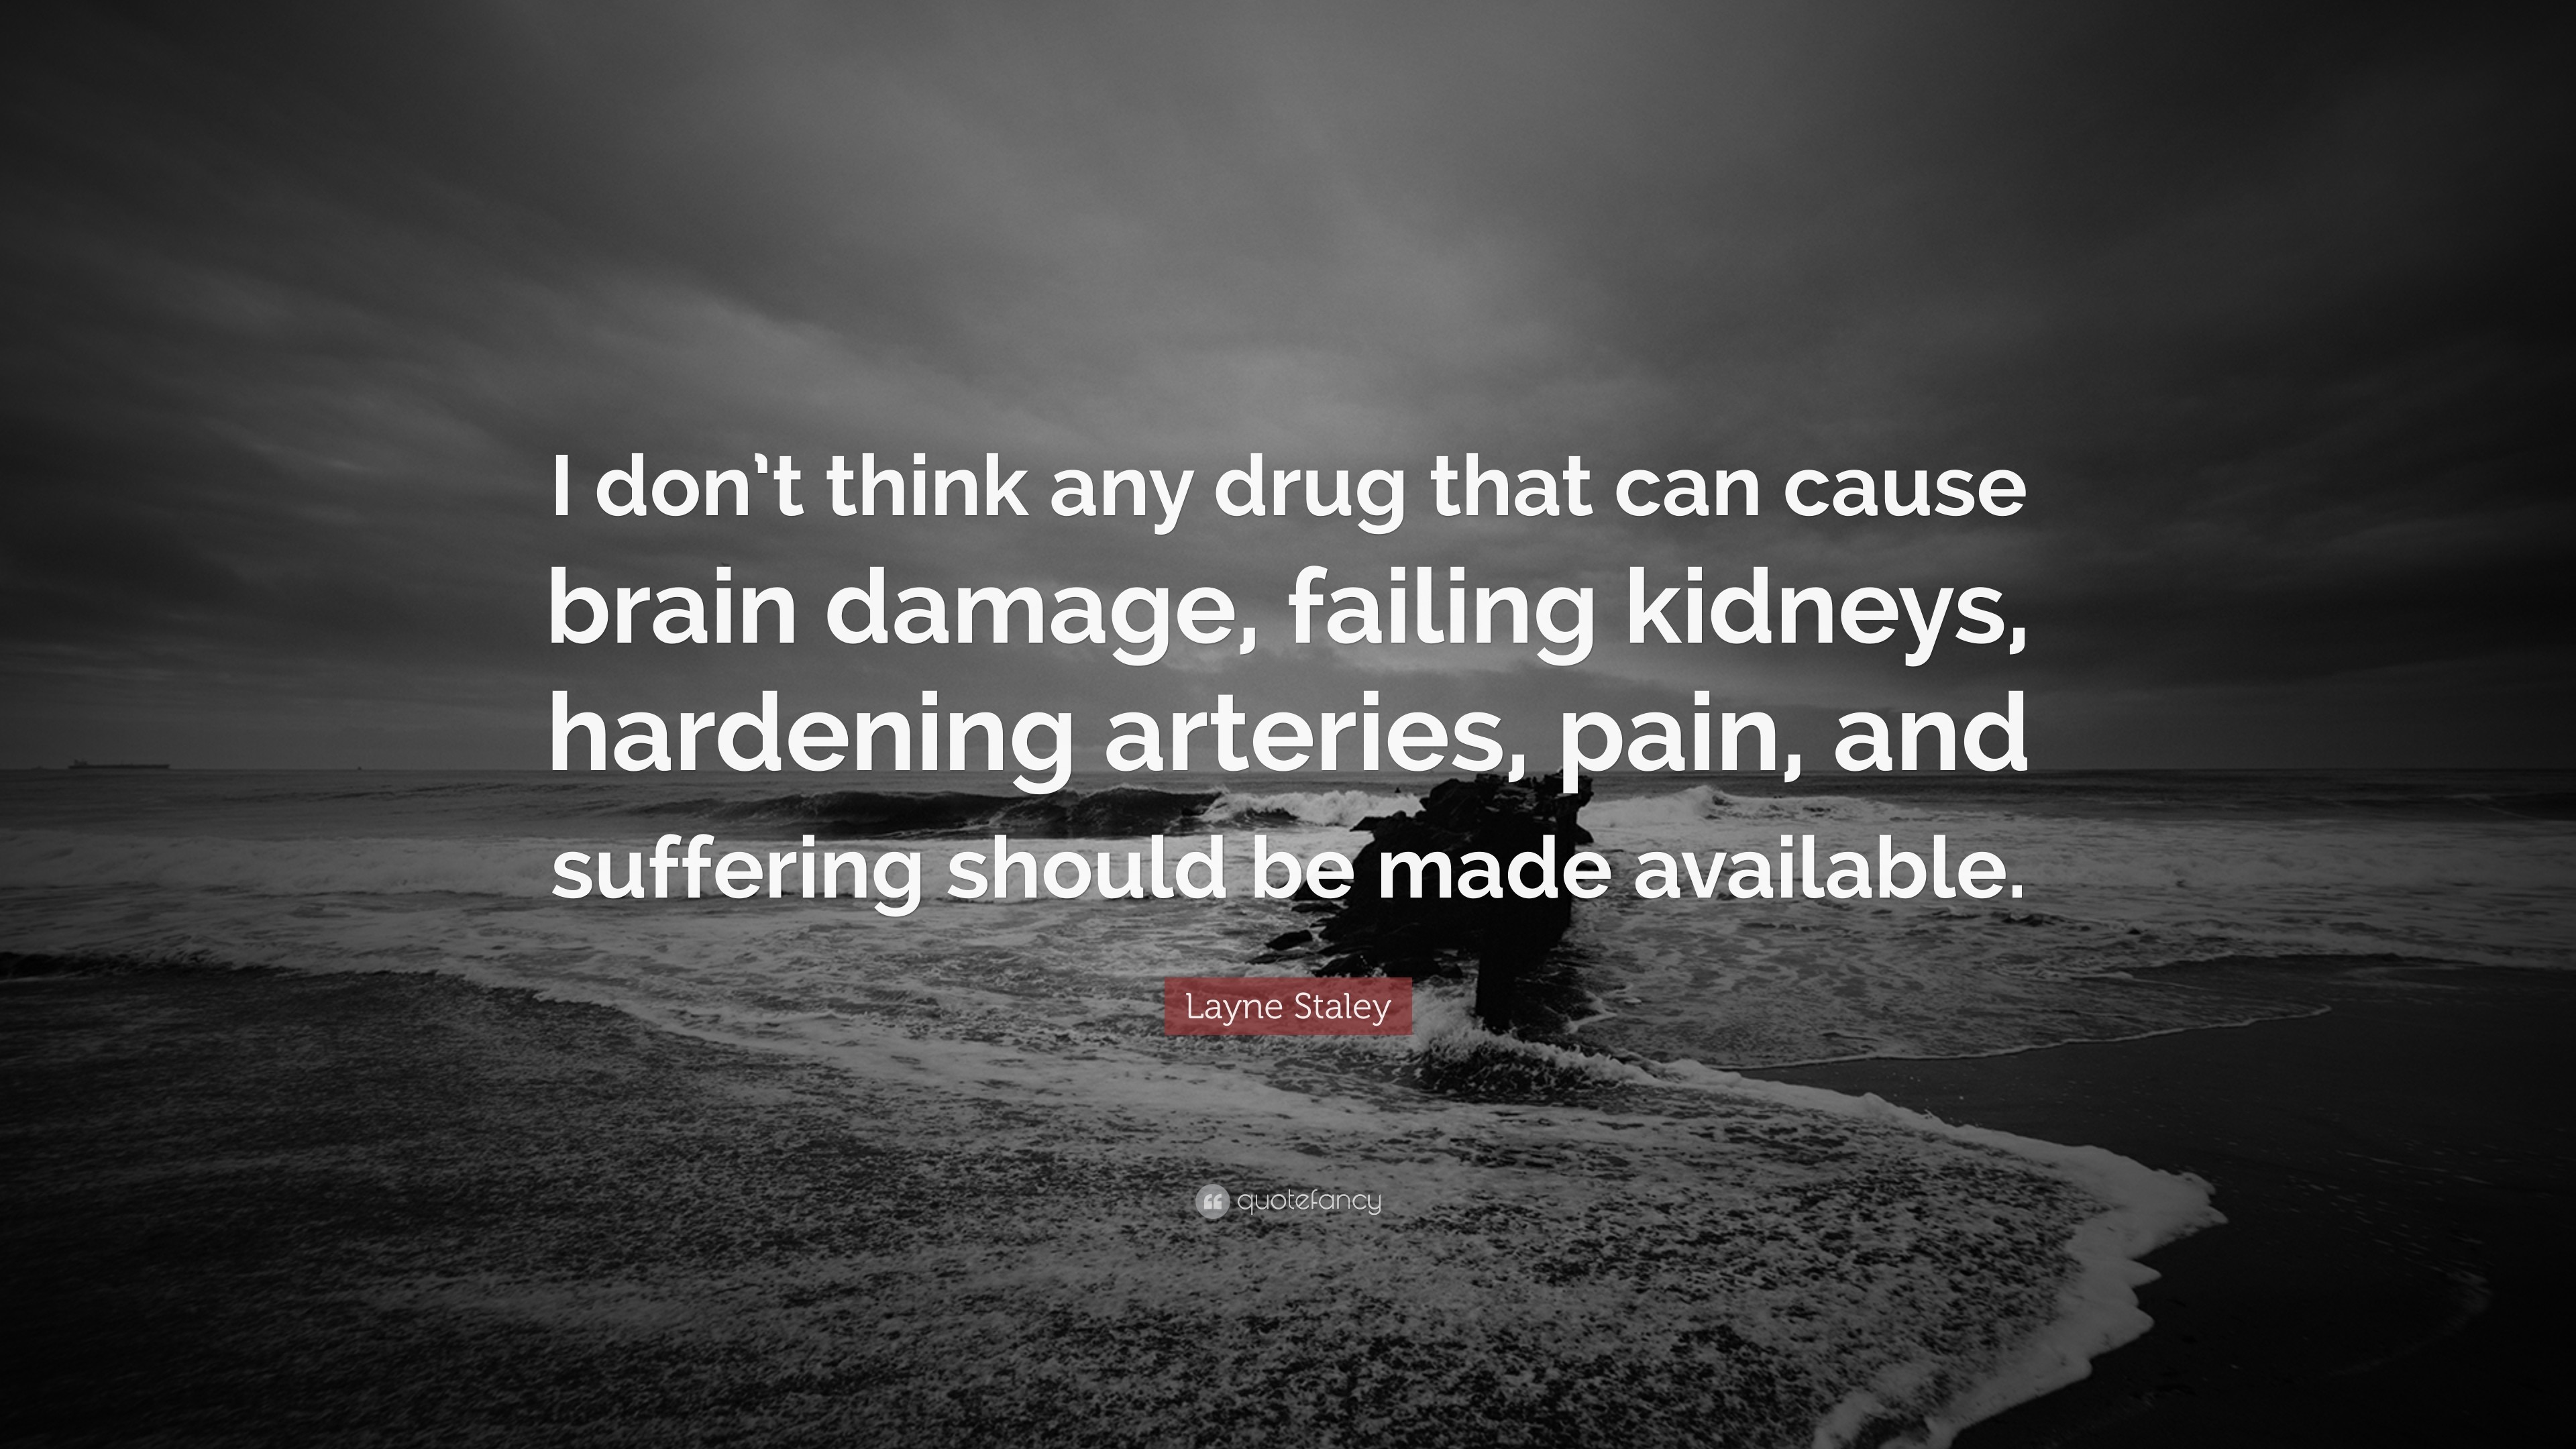 3840x2160 Layne Staley Quote: “I don't think any drug that can cause brain